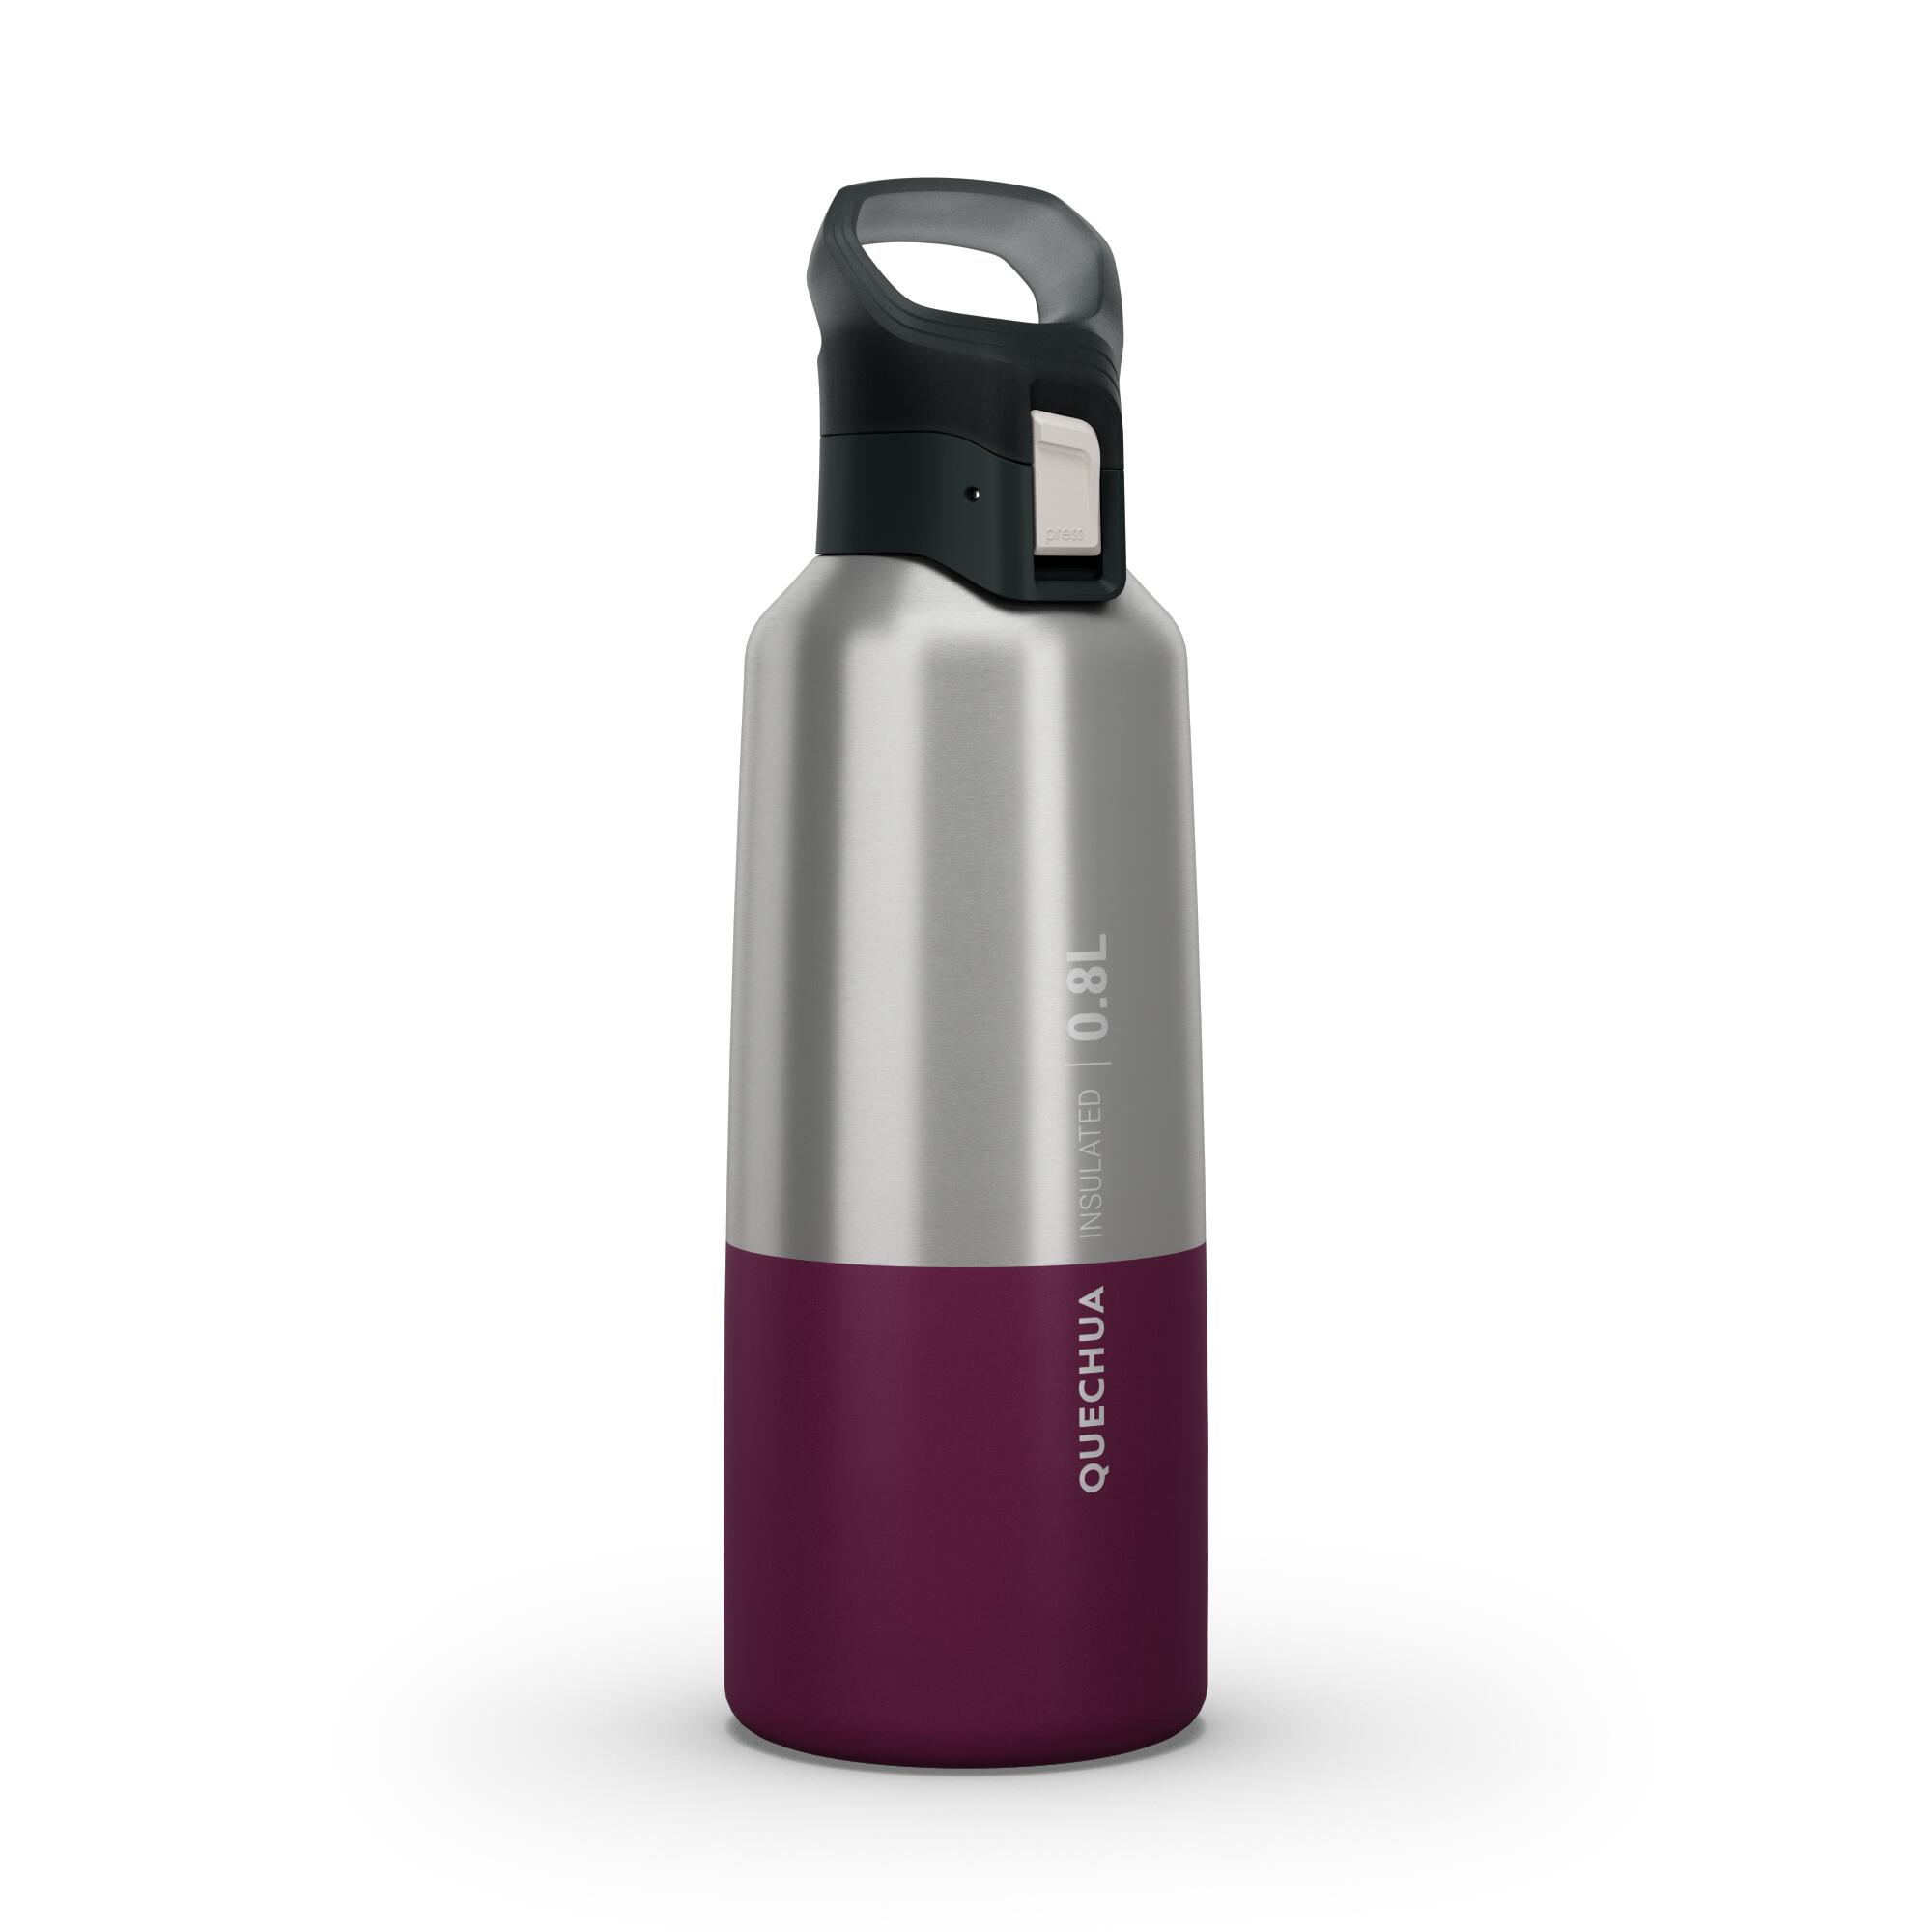 QUECHUA 0.8 L stainless steel isothermal water bottle with quick-release cap for hiking 